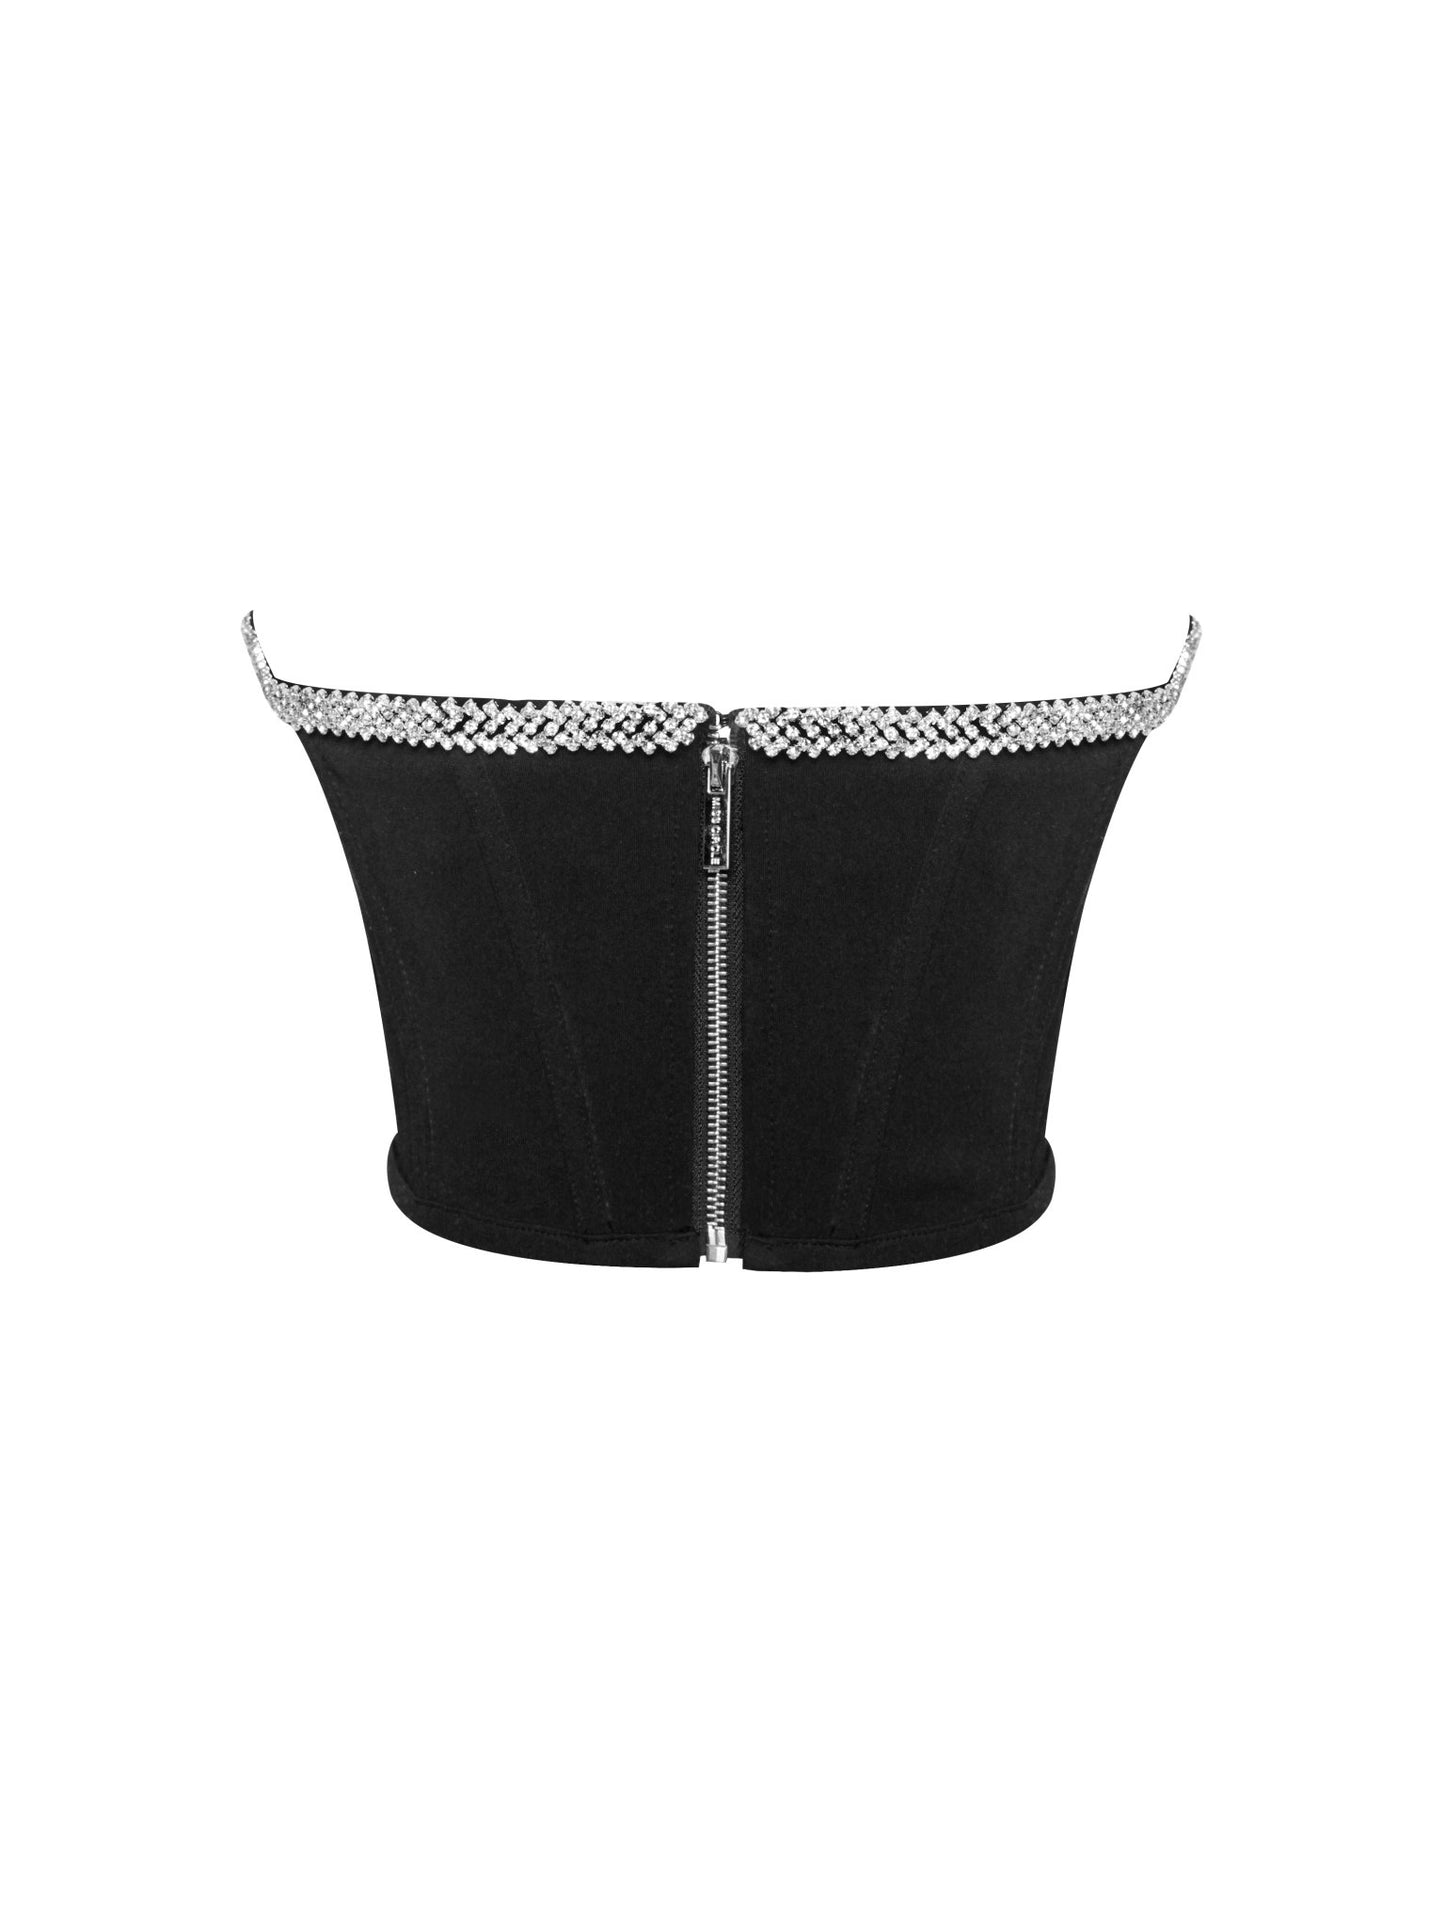 Melanie Black Corset Top With Crystal Trim - HOUSE OF SHE